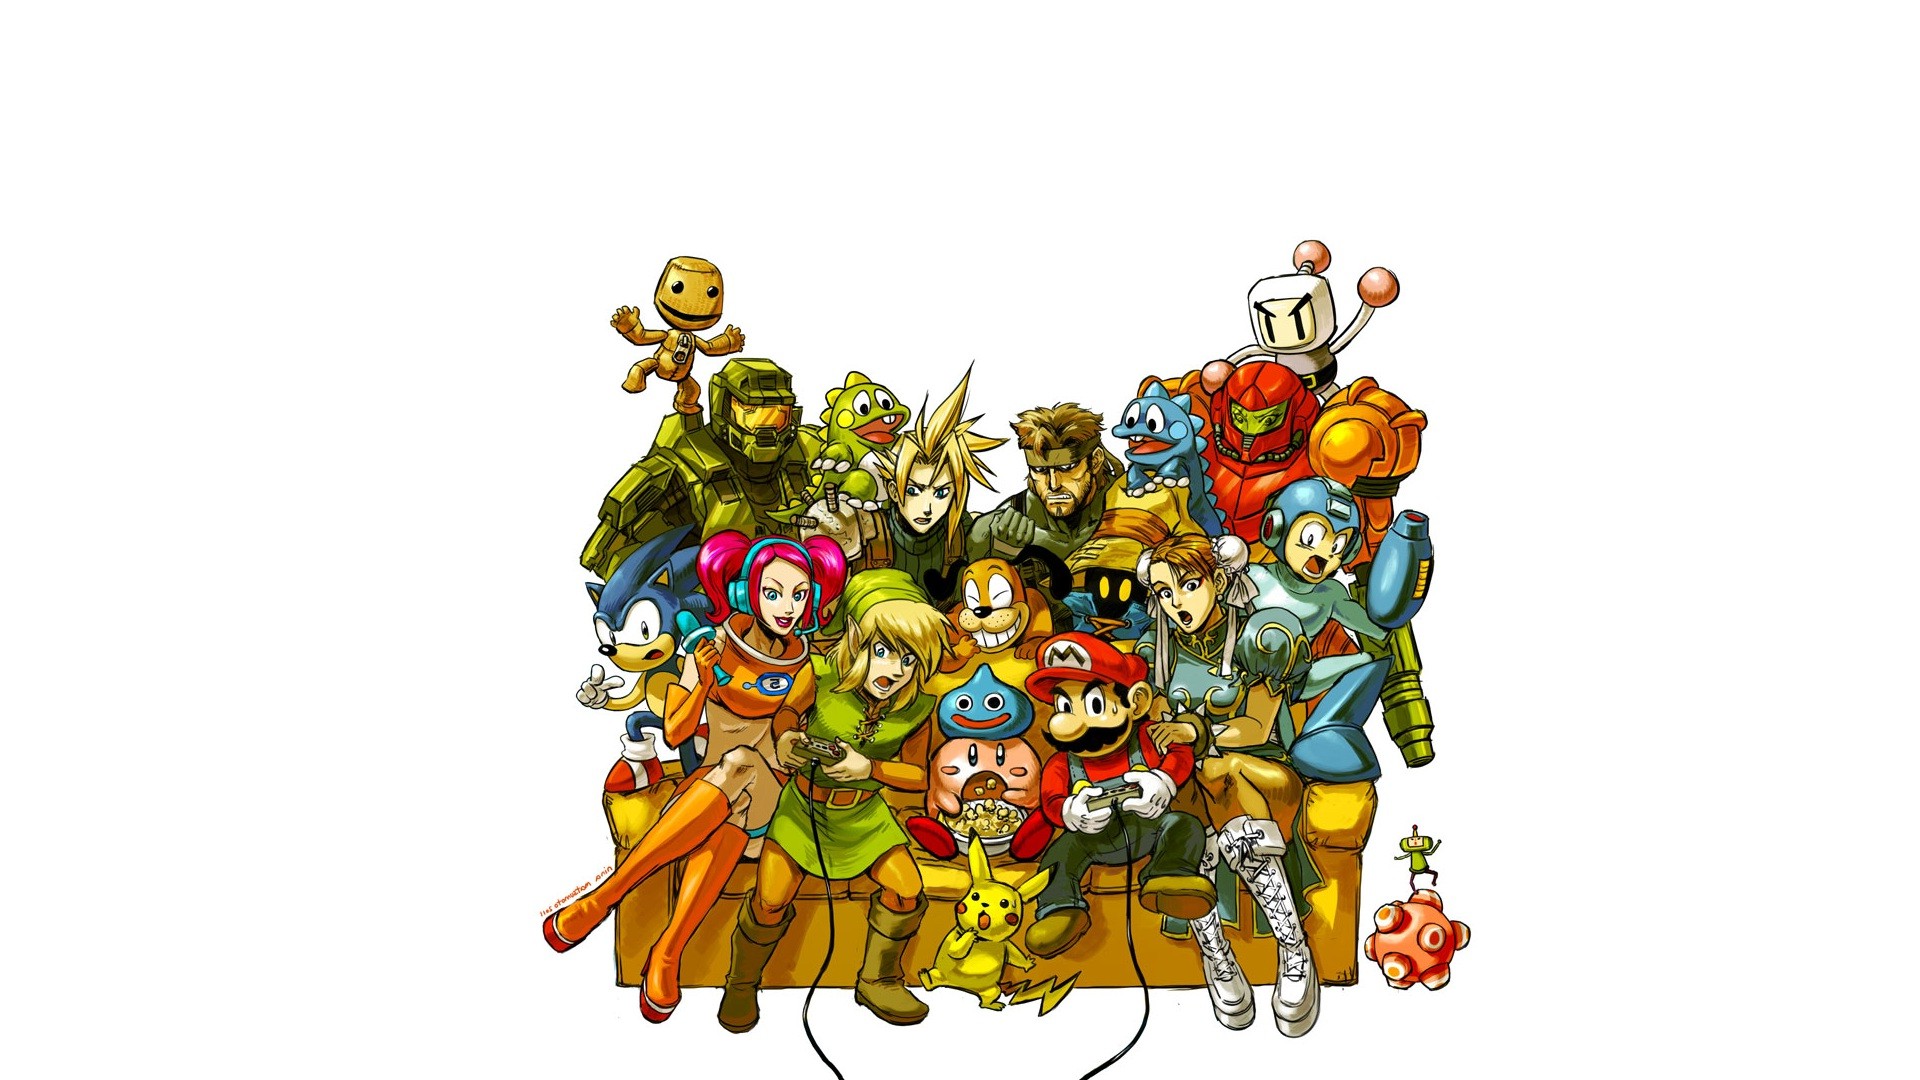 video Game Characters, Mega Man, Sonic The Hedgehog, Solid Snake, Master Chief, Cloud Strife, Bomberman Wallpaper